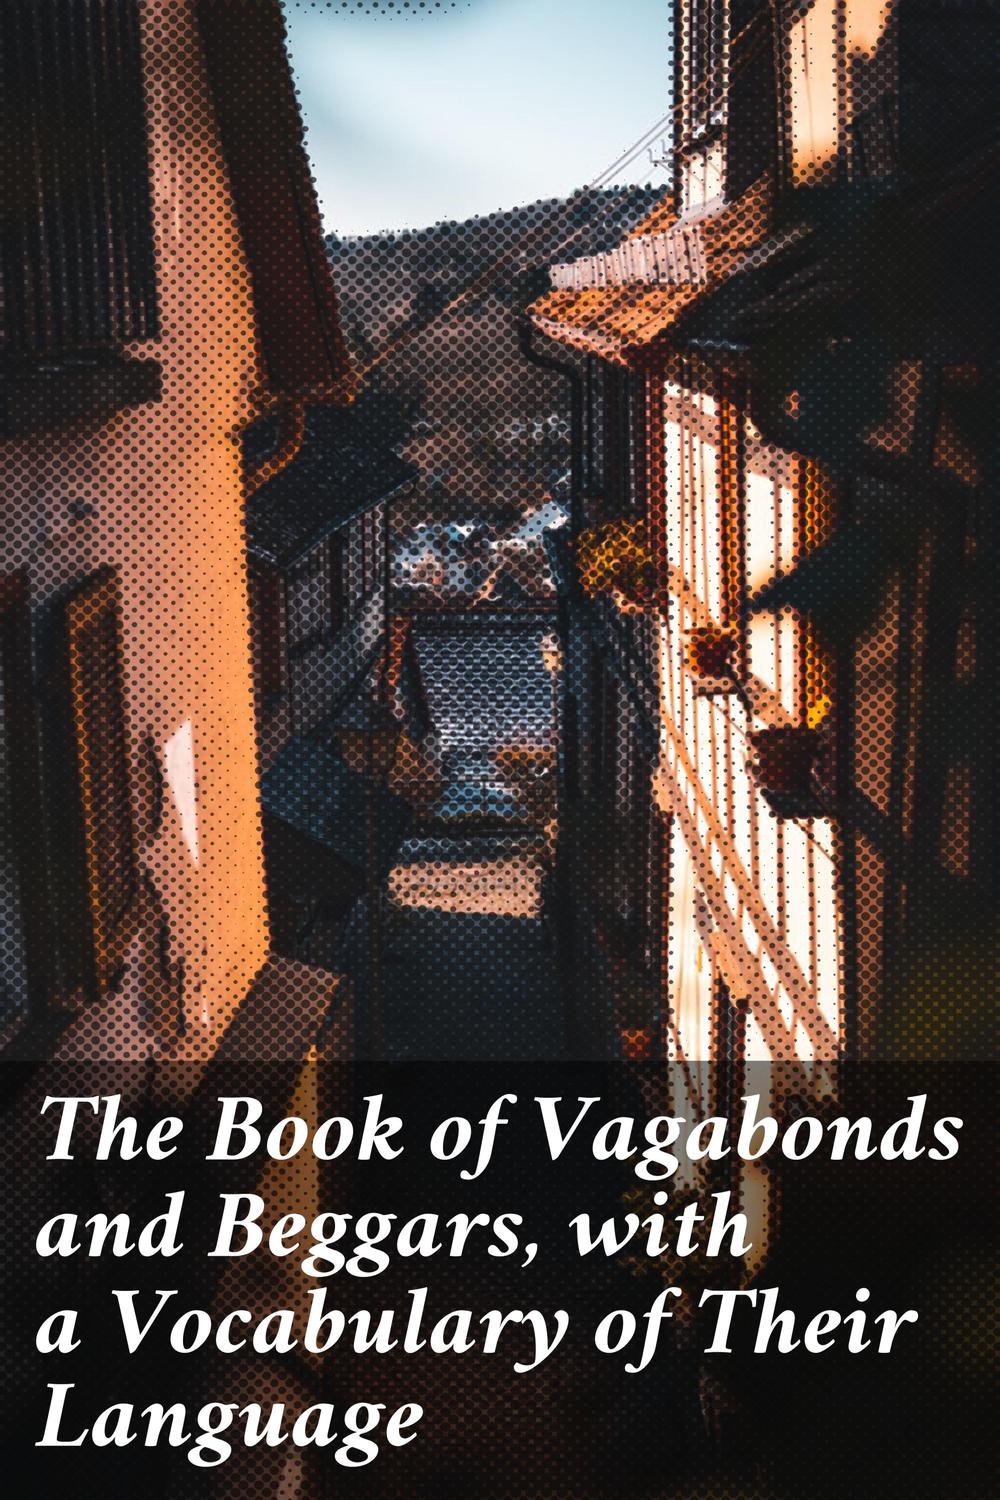 The Book of Vagabonds and Beggars, with a Vocabulary of Their Language - Various, John Camden Hotten, Martin Luther